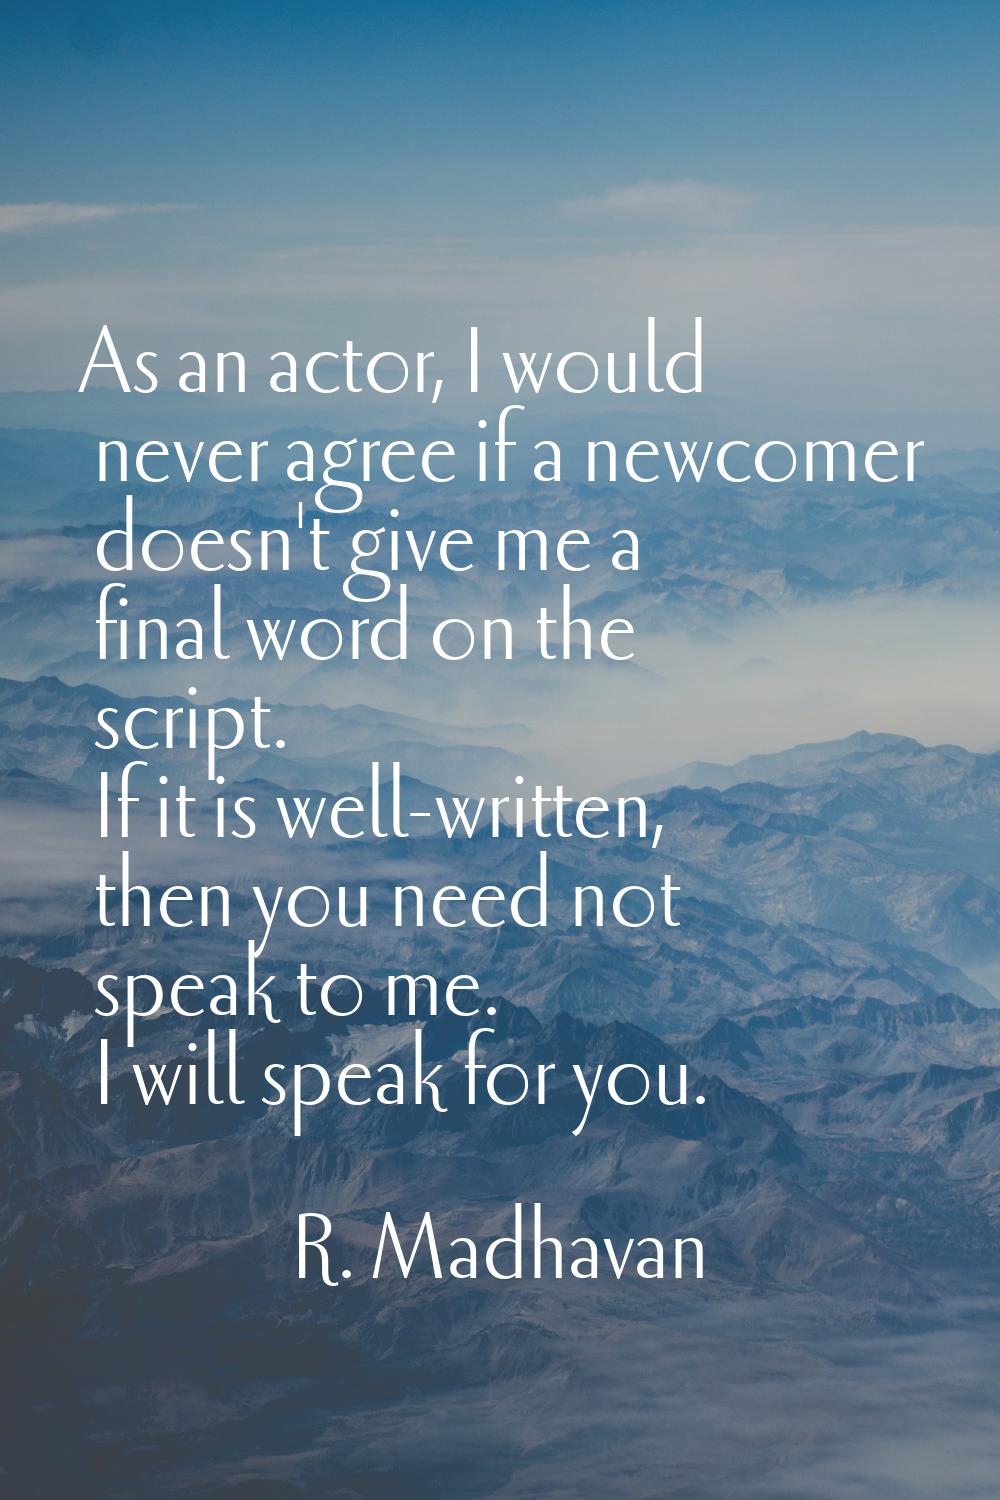 As an actor, I would never agree if a newcomer doesn't give me a final word on the script. If it is